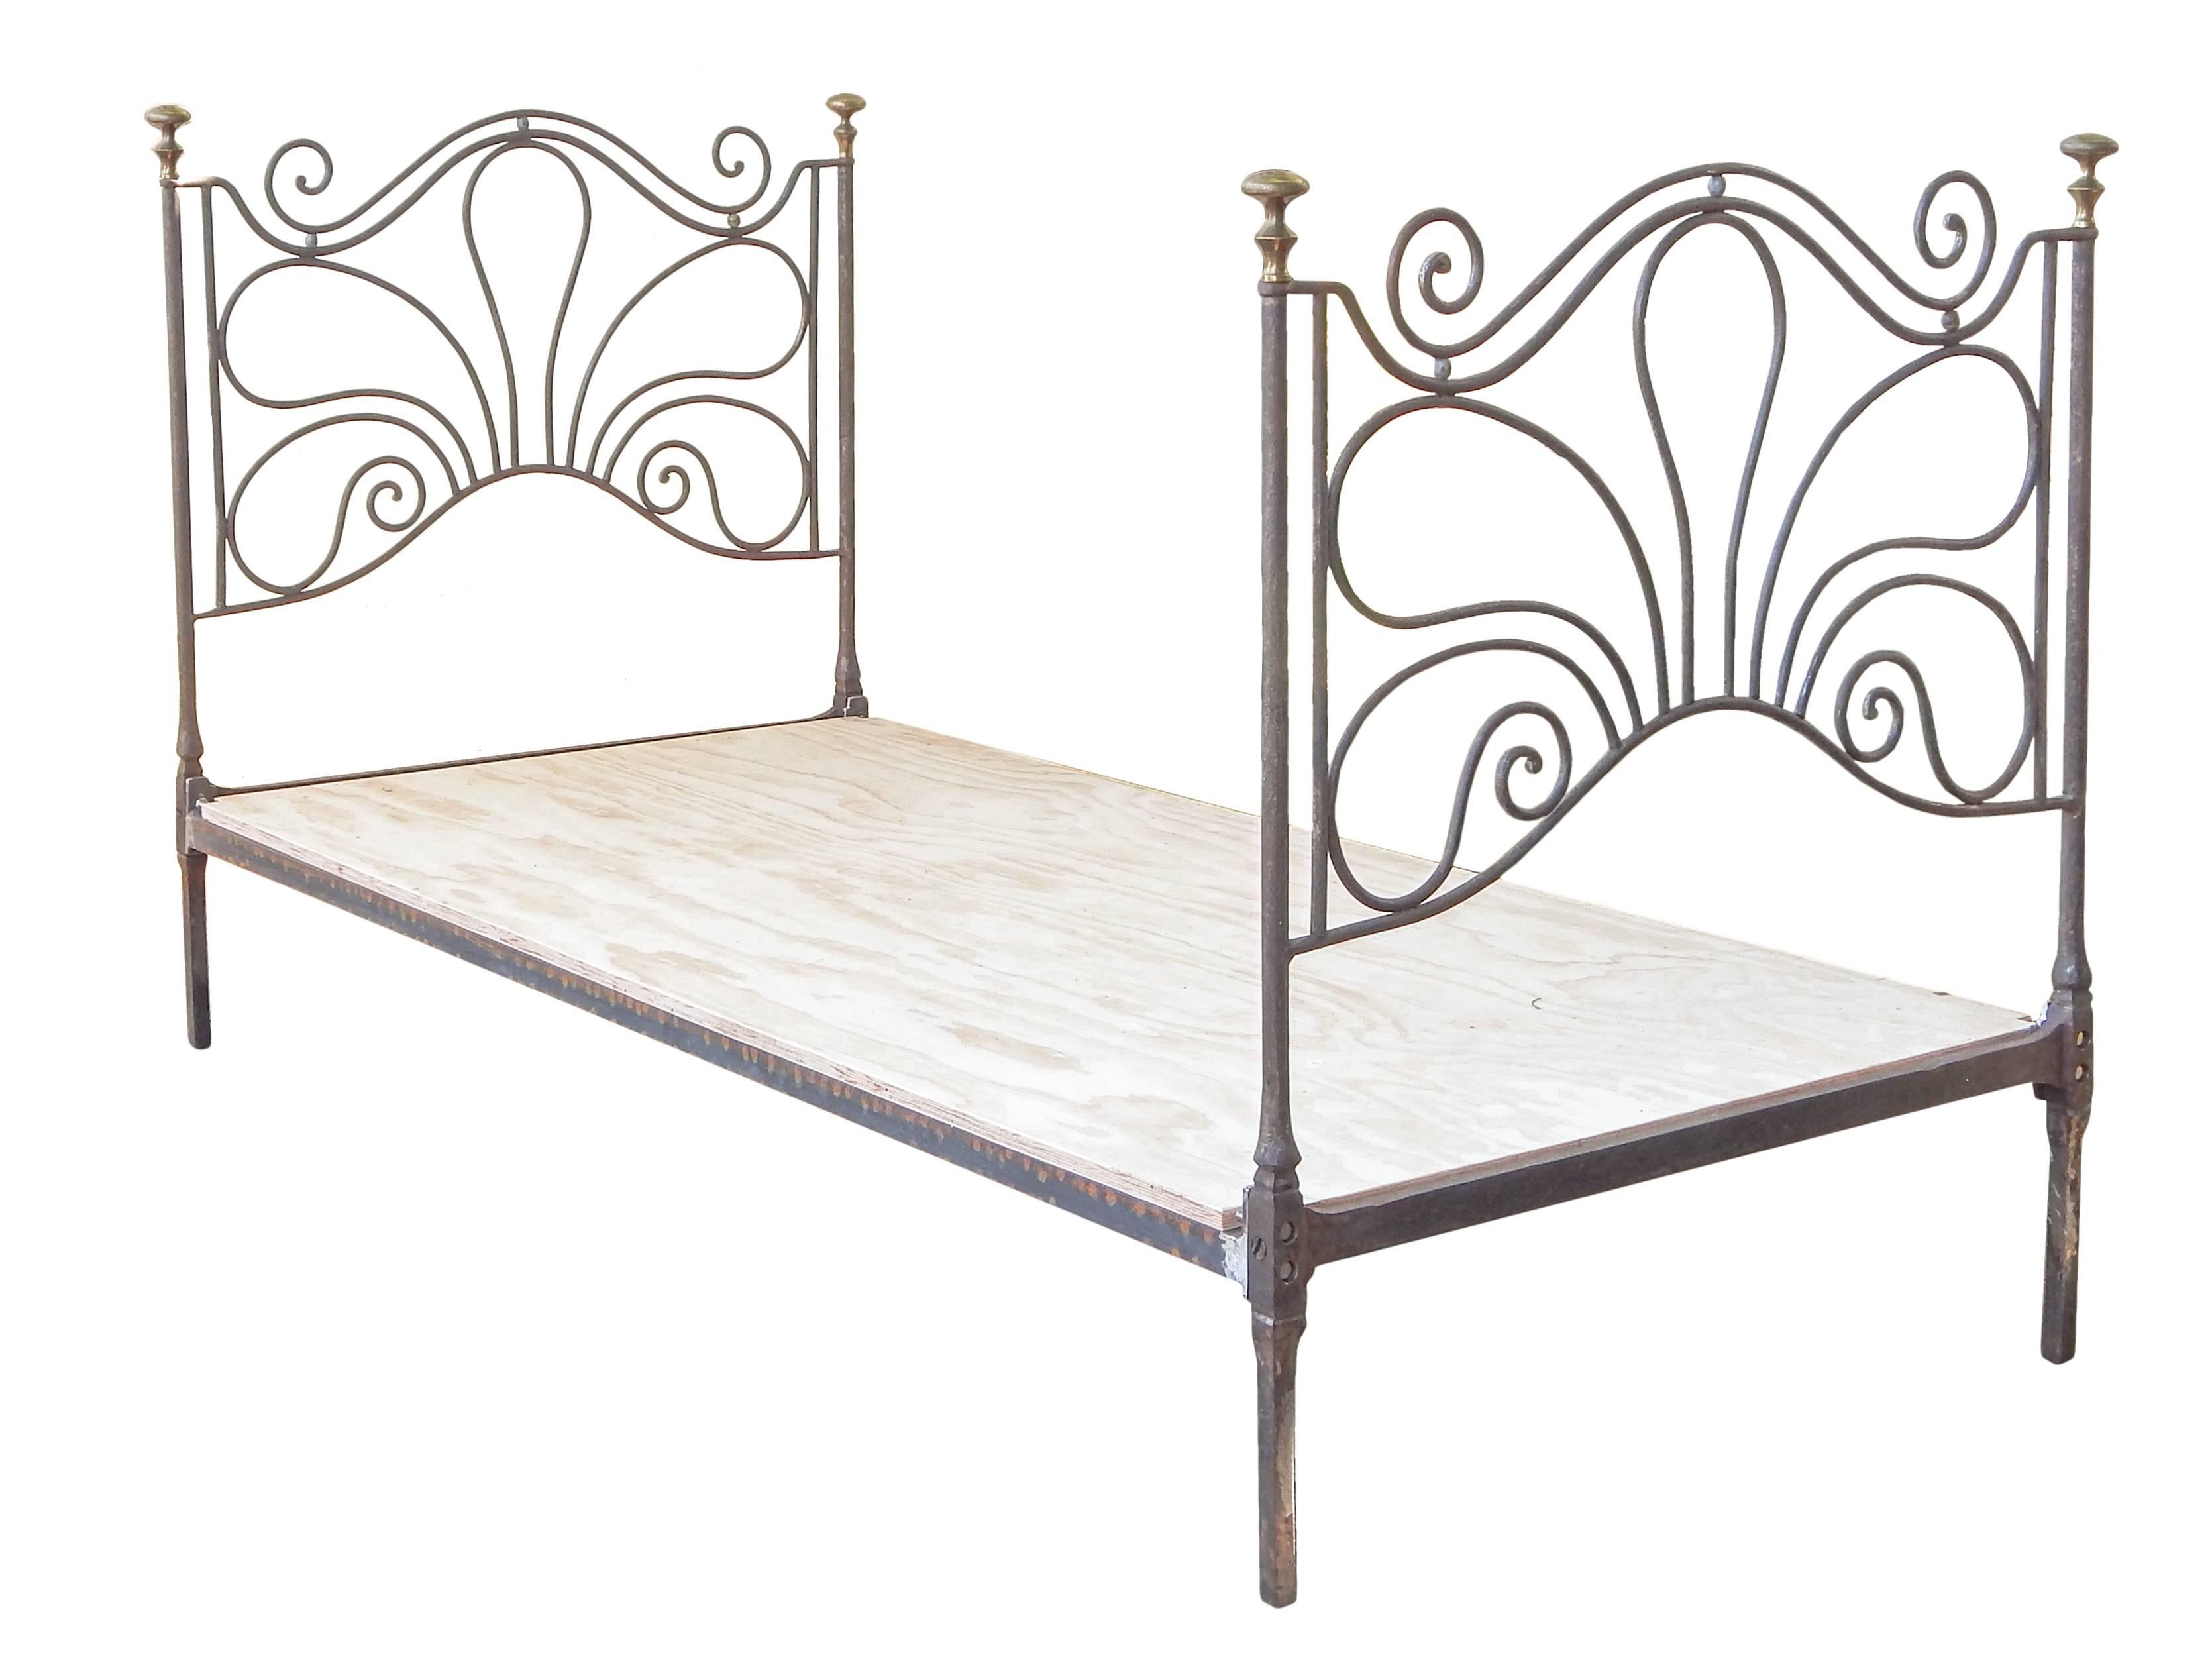 French iron and brass daybed. New rails. Mattress board included.
Interior 77” inches long.